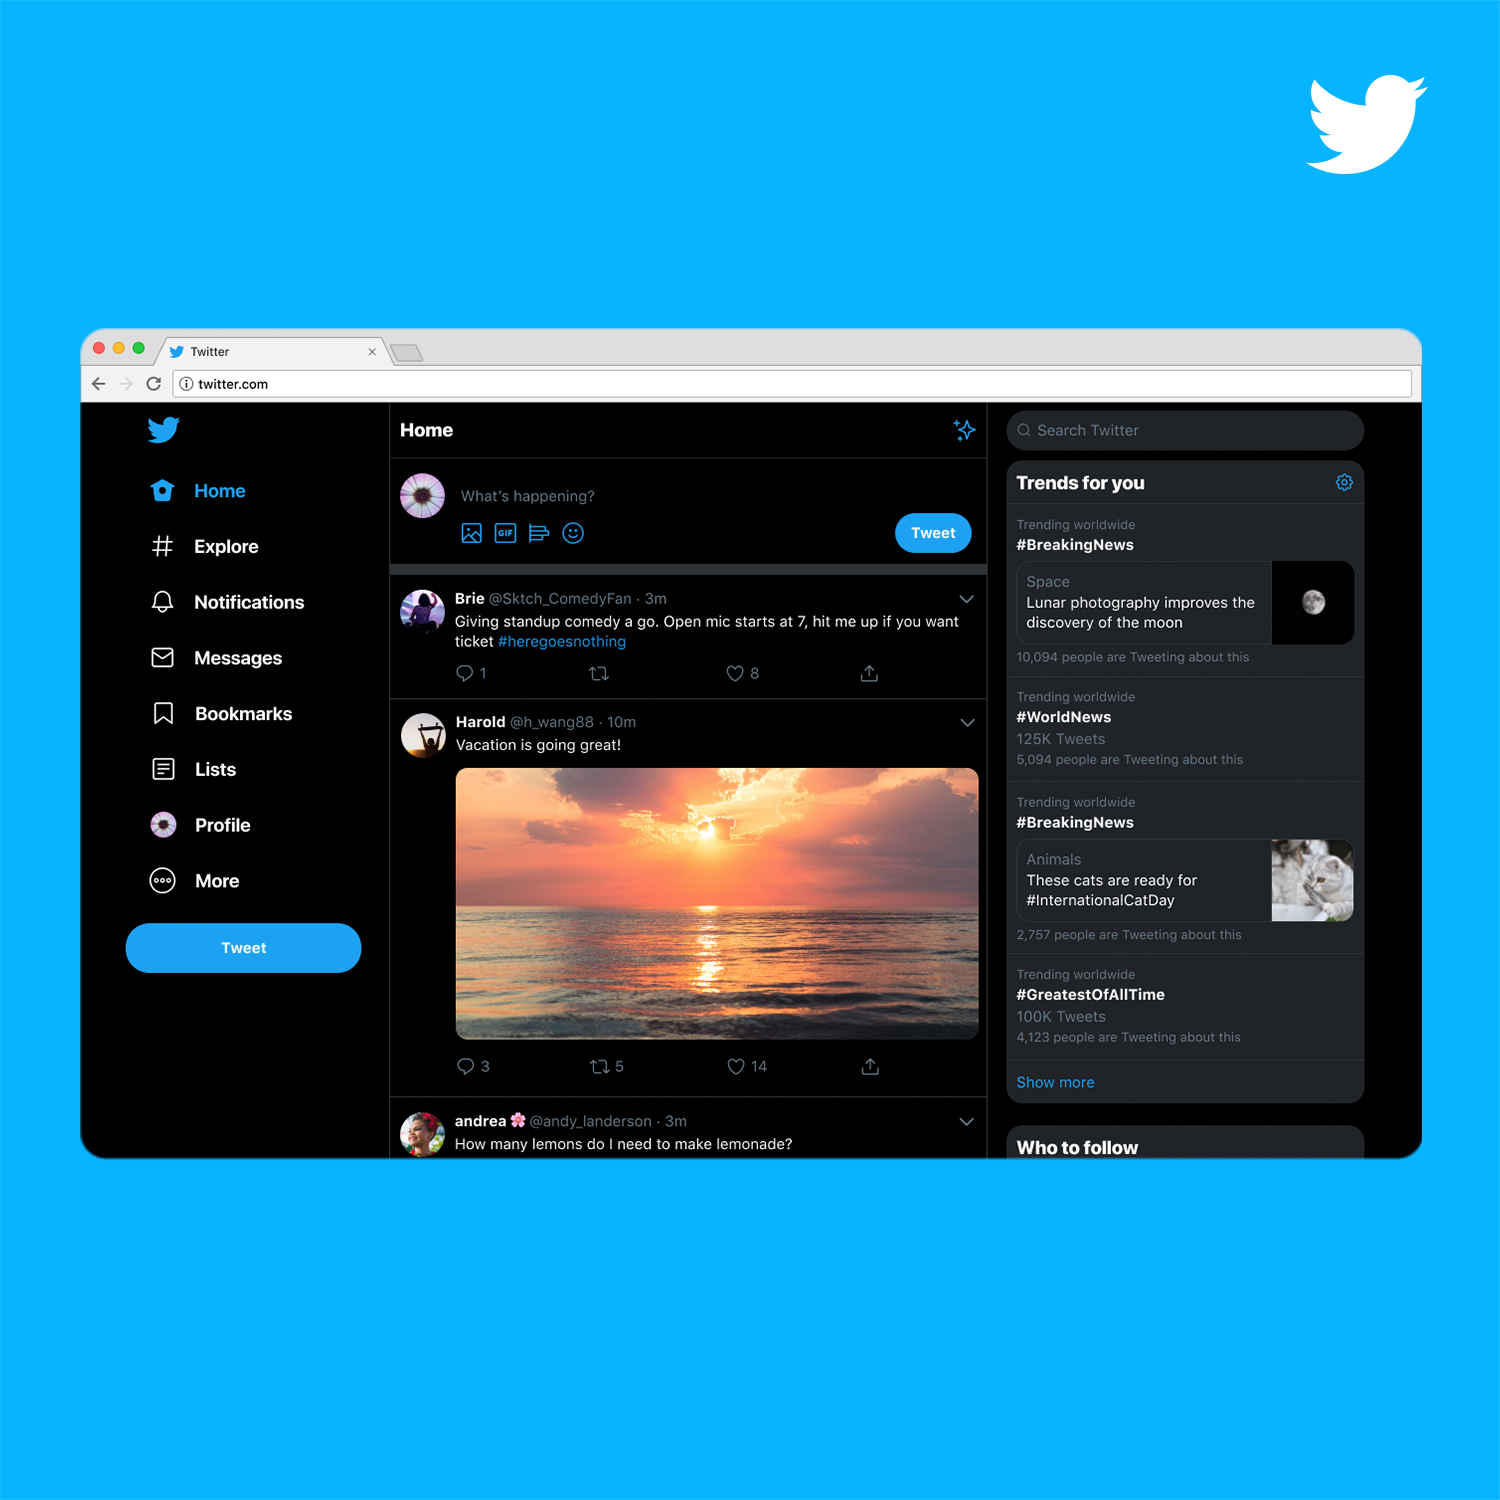 Twitter Introduces New Refreshed and Updated Twitter.com Website Dark-Mode_Home_1500x1500_ENG-JV.png.img.fullhd.medium.png